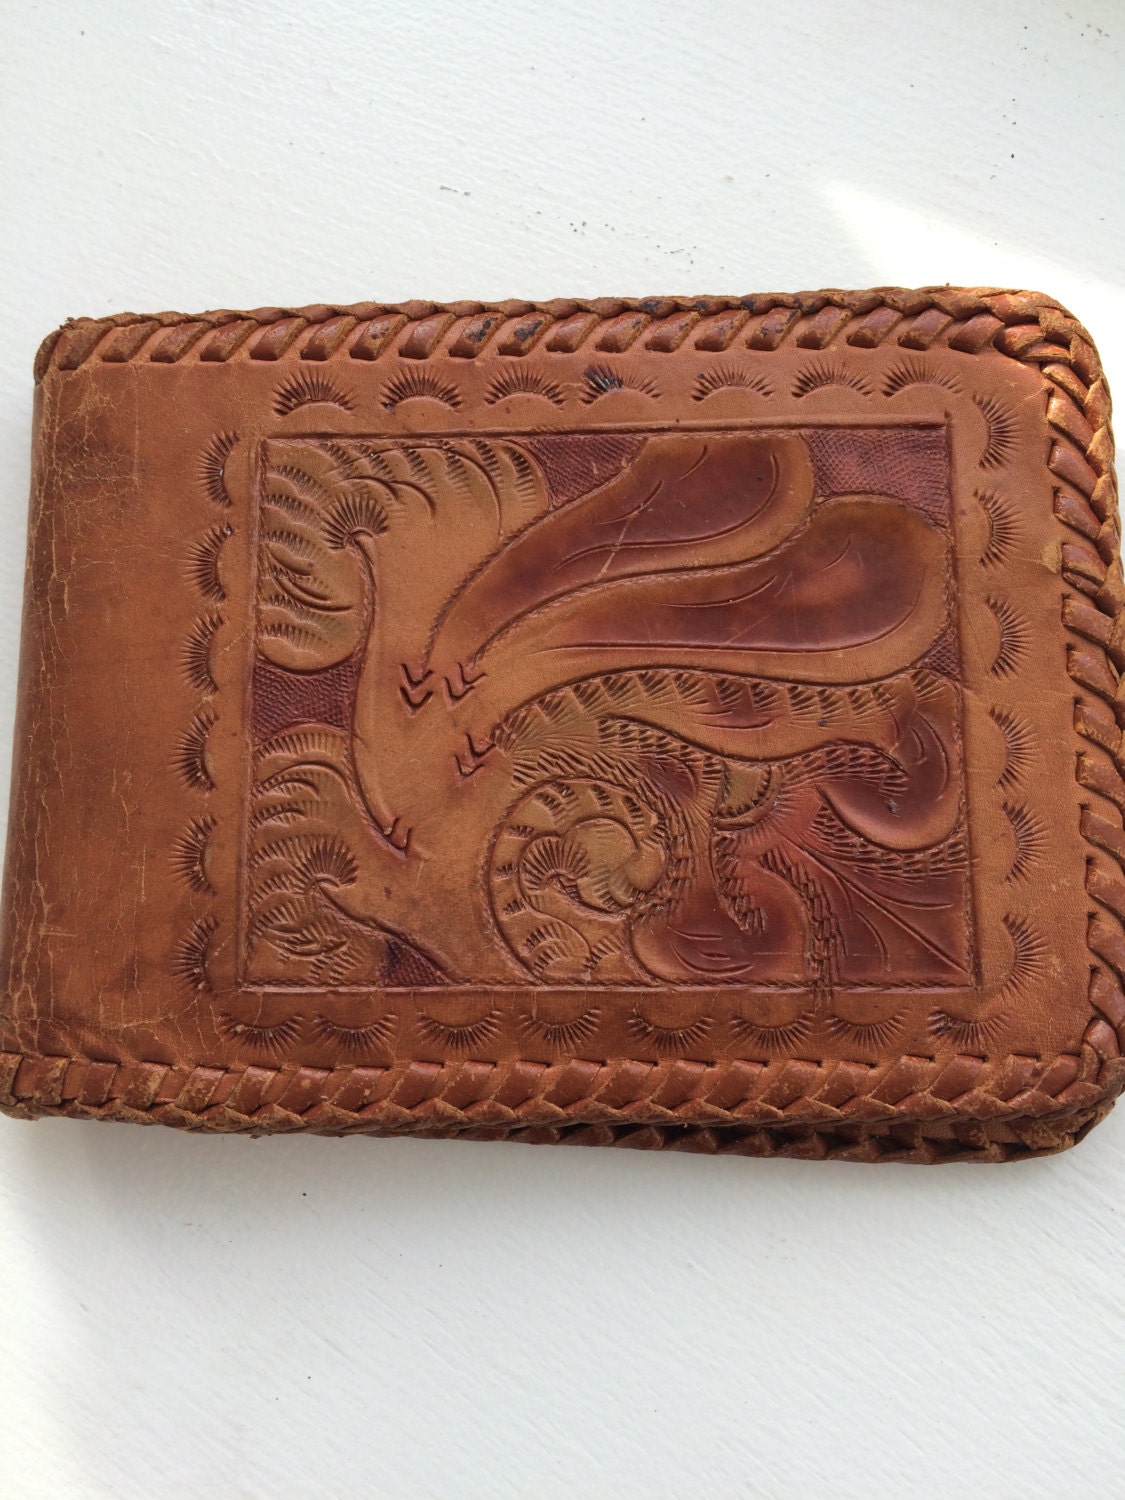 Vintage Men's Hand Tooled Leather BiFold Wallet by ItsallforHim